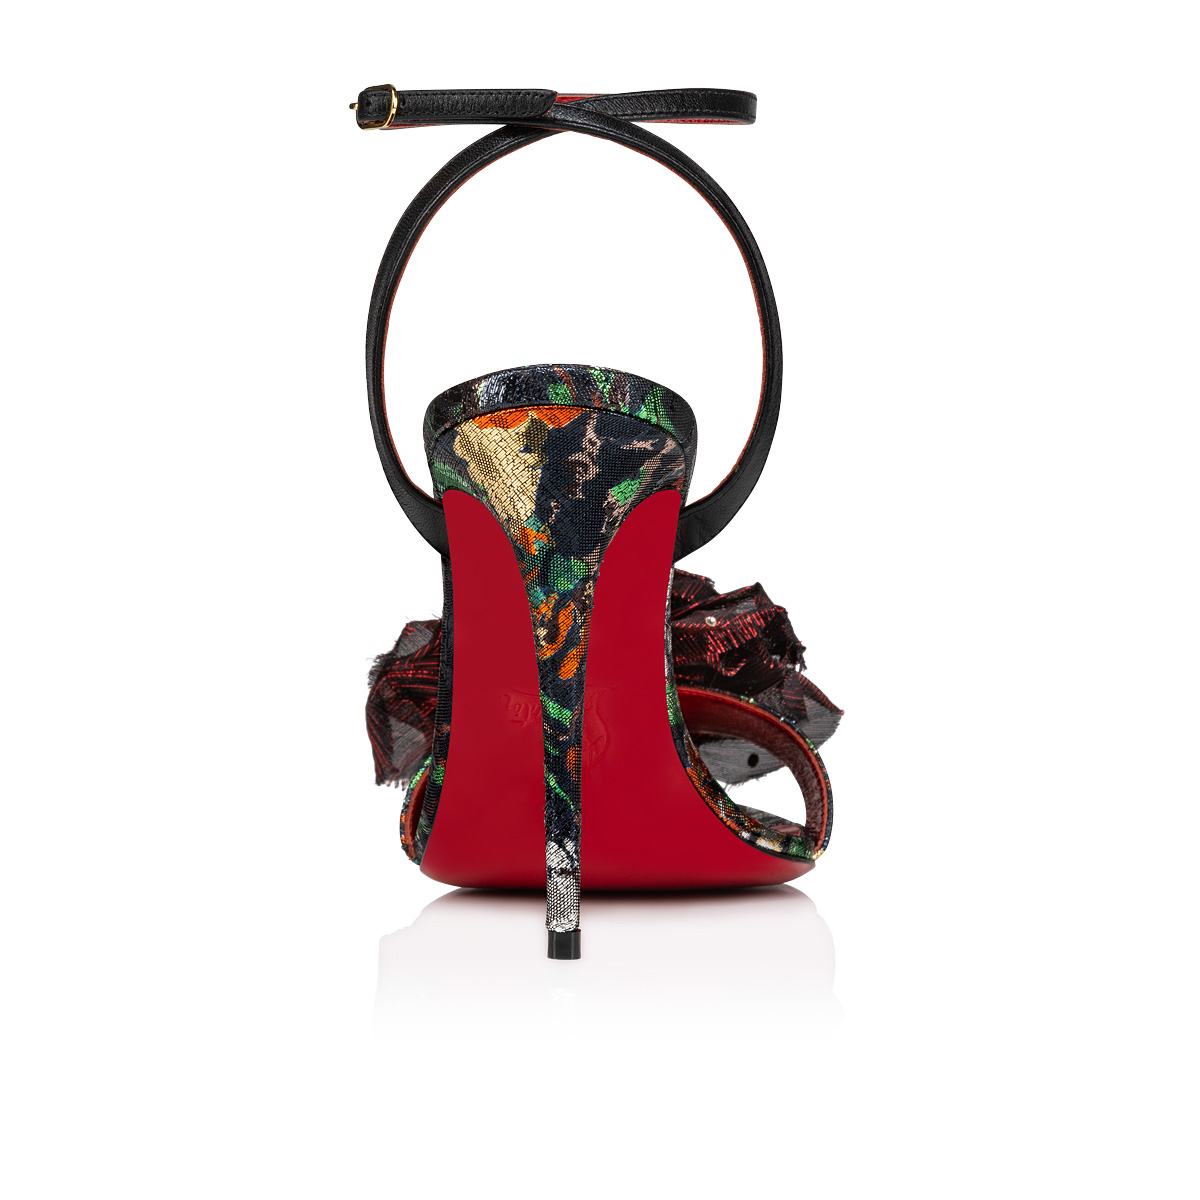 Christian Louboutin Flora Queen Ankle-Strap Sandals